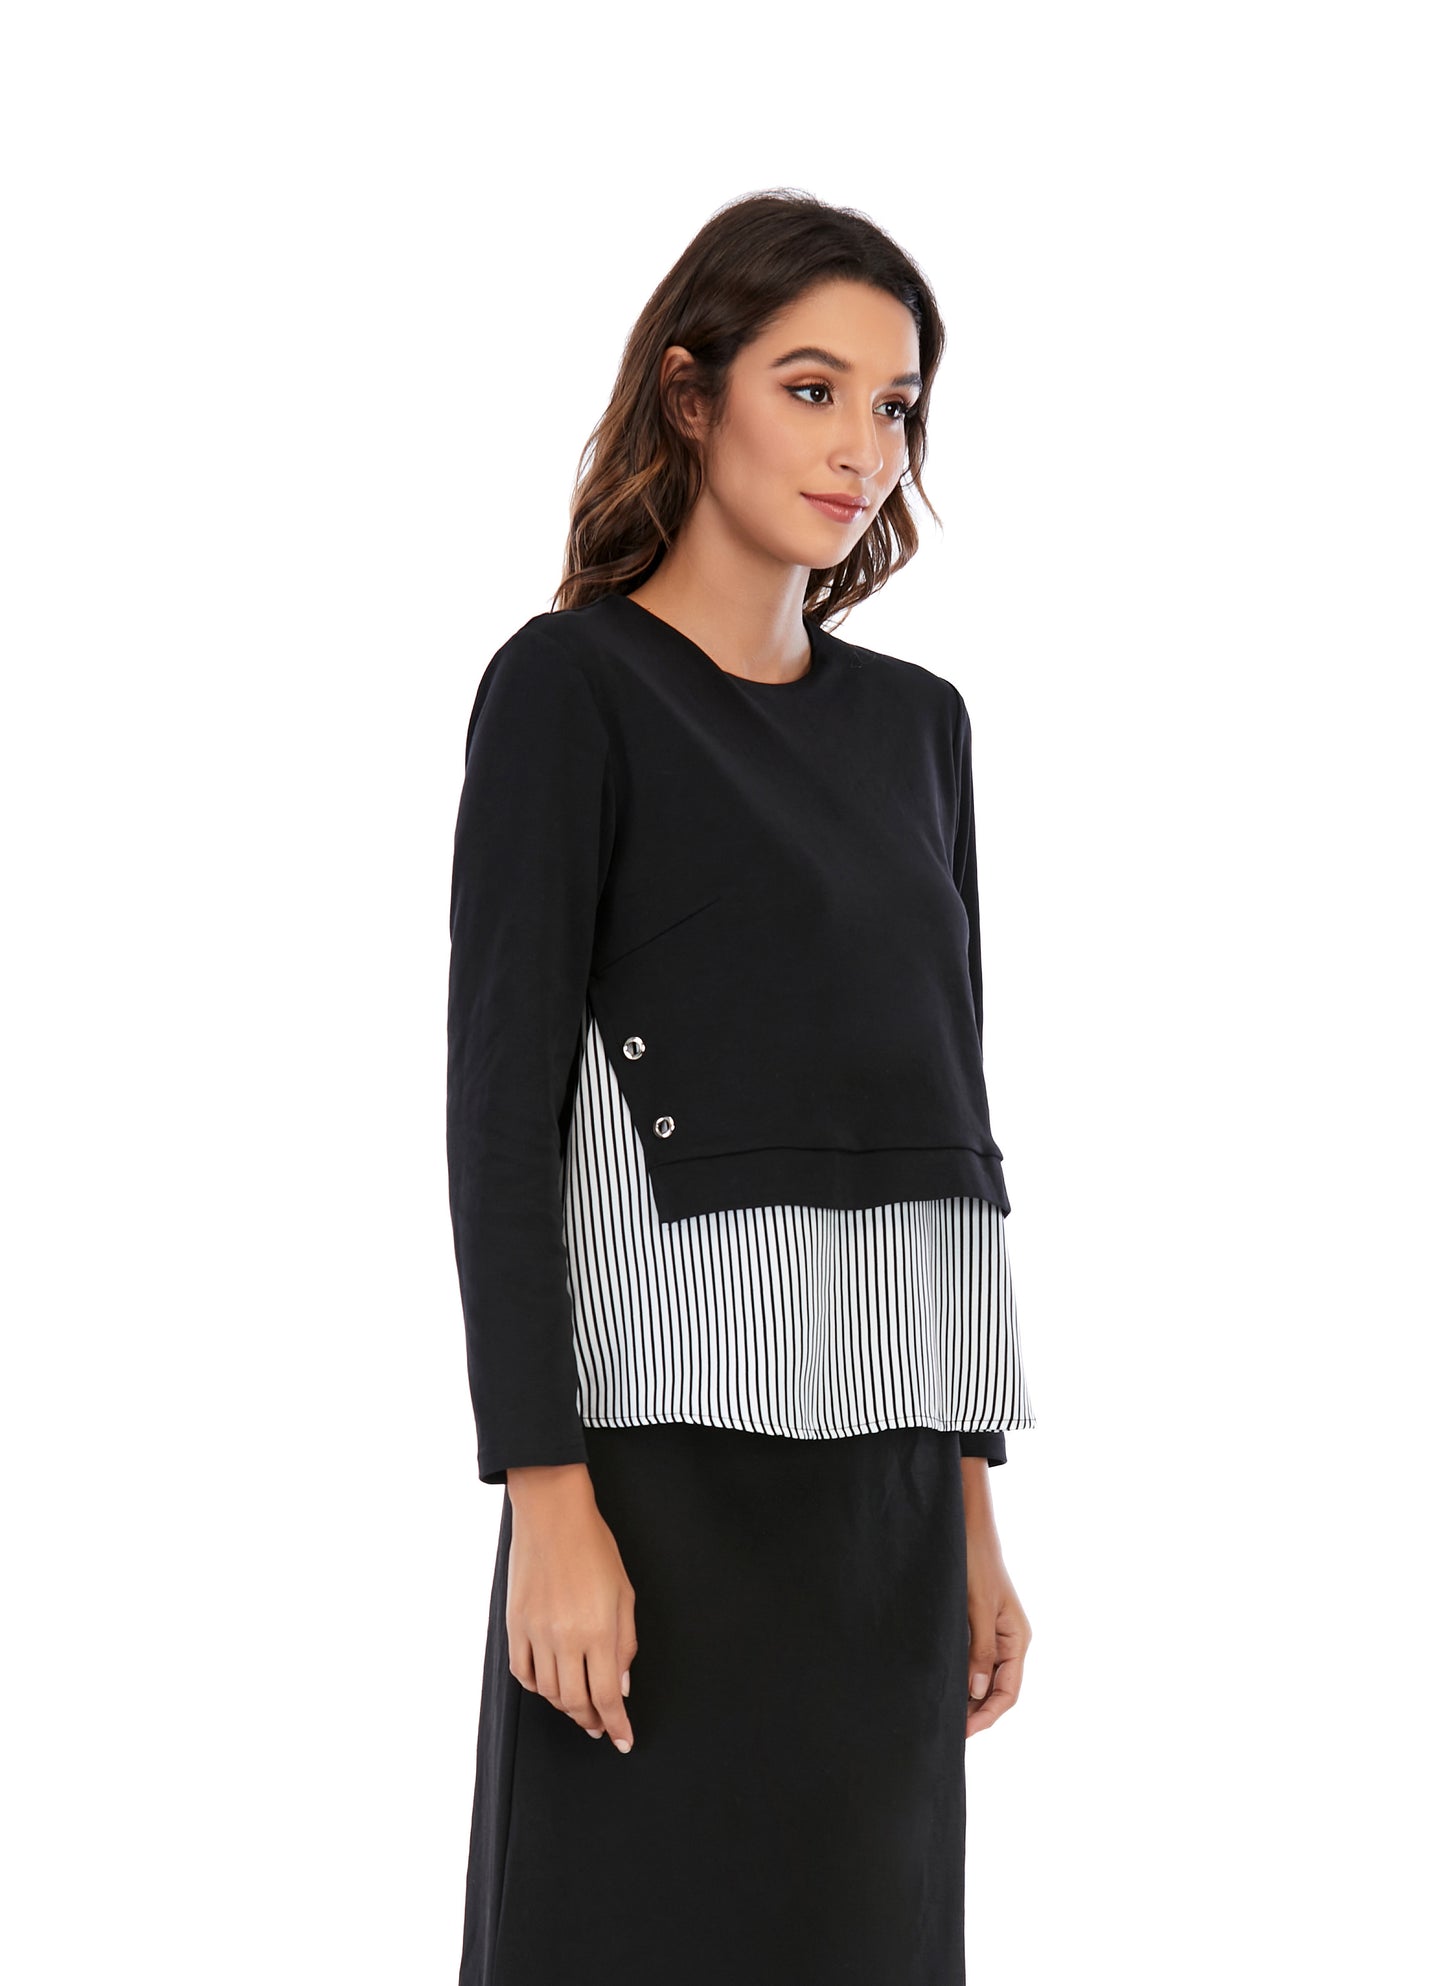 Solid and Striped Long Sleeve Monochrome - seilerlanguageservices